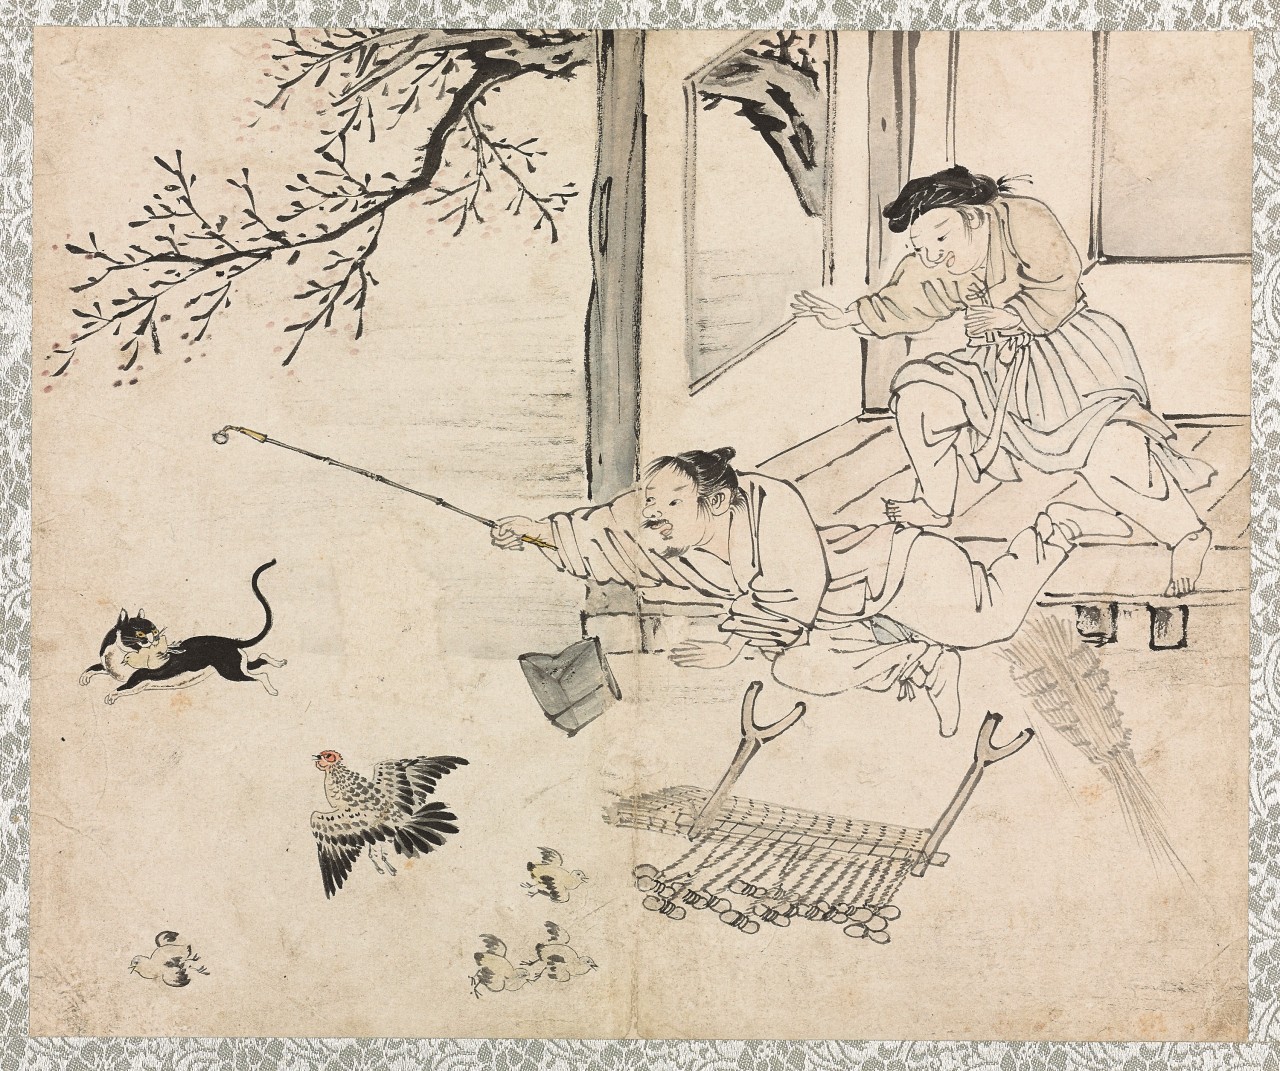 Pictured is a drawing of a cat snatching a chick, from Kim Deuk-sin’s “Album of Genre Paintings” from the Joseon era. The album is owned by the Kansong Art Museum. (CHA)